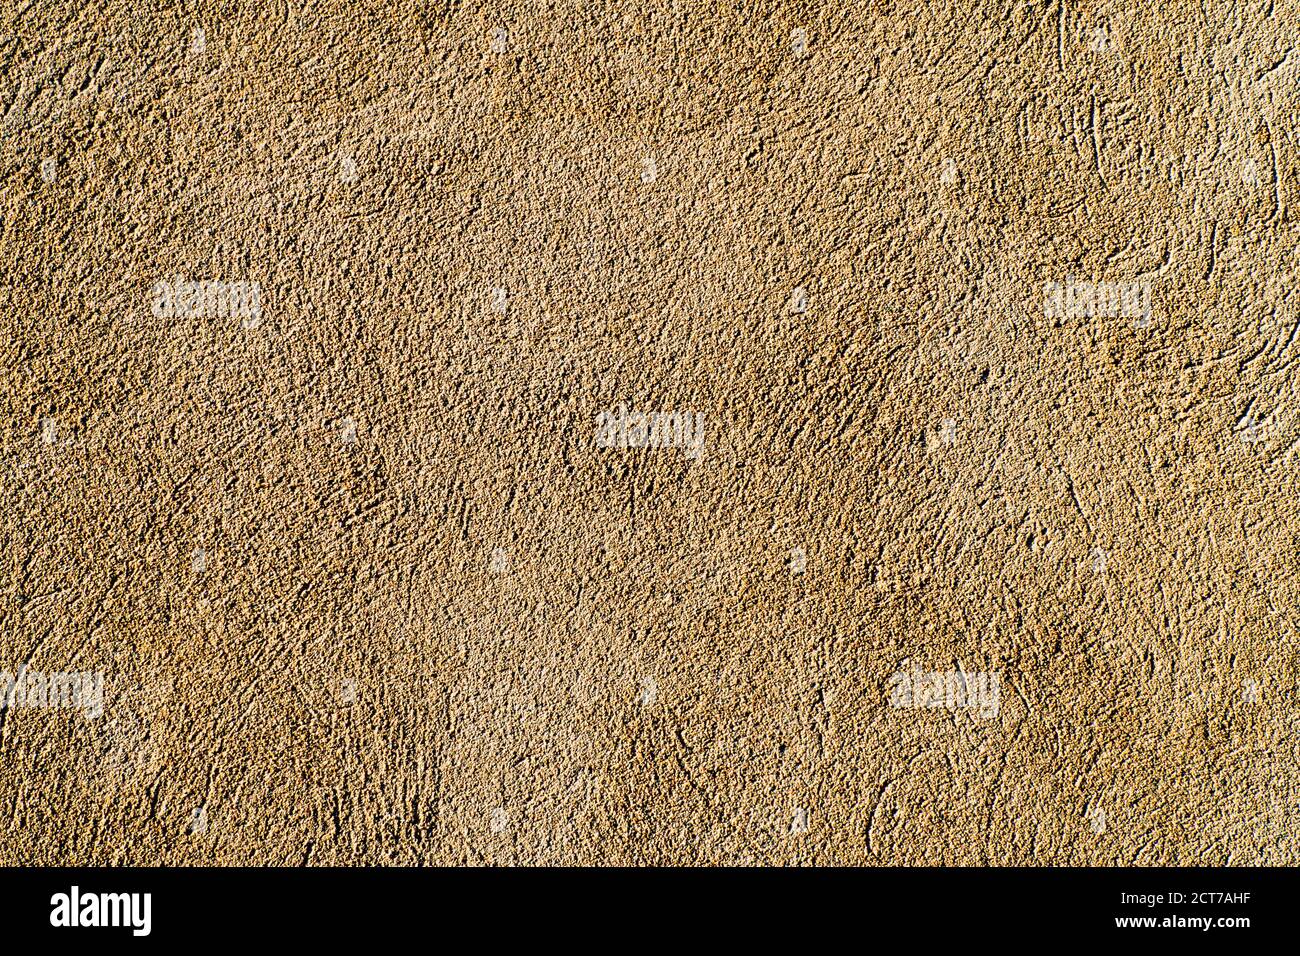 Grunge Cement Texture Backdrop, Rough Concrete Stone Wall Background Stock Photo